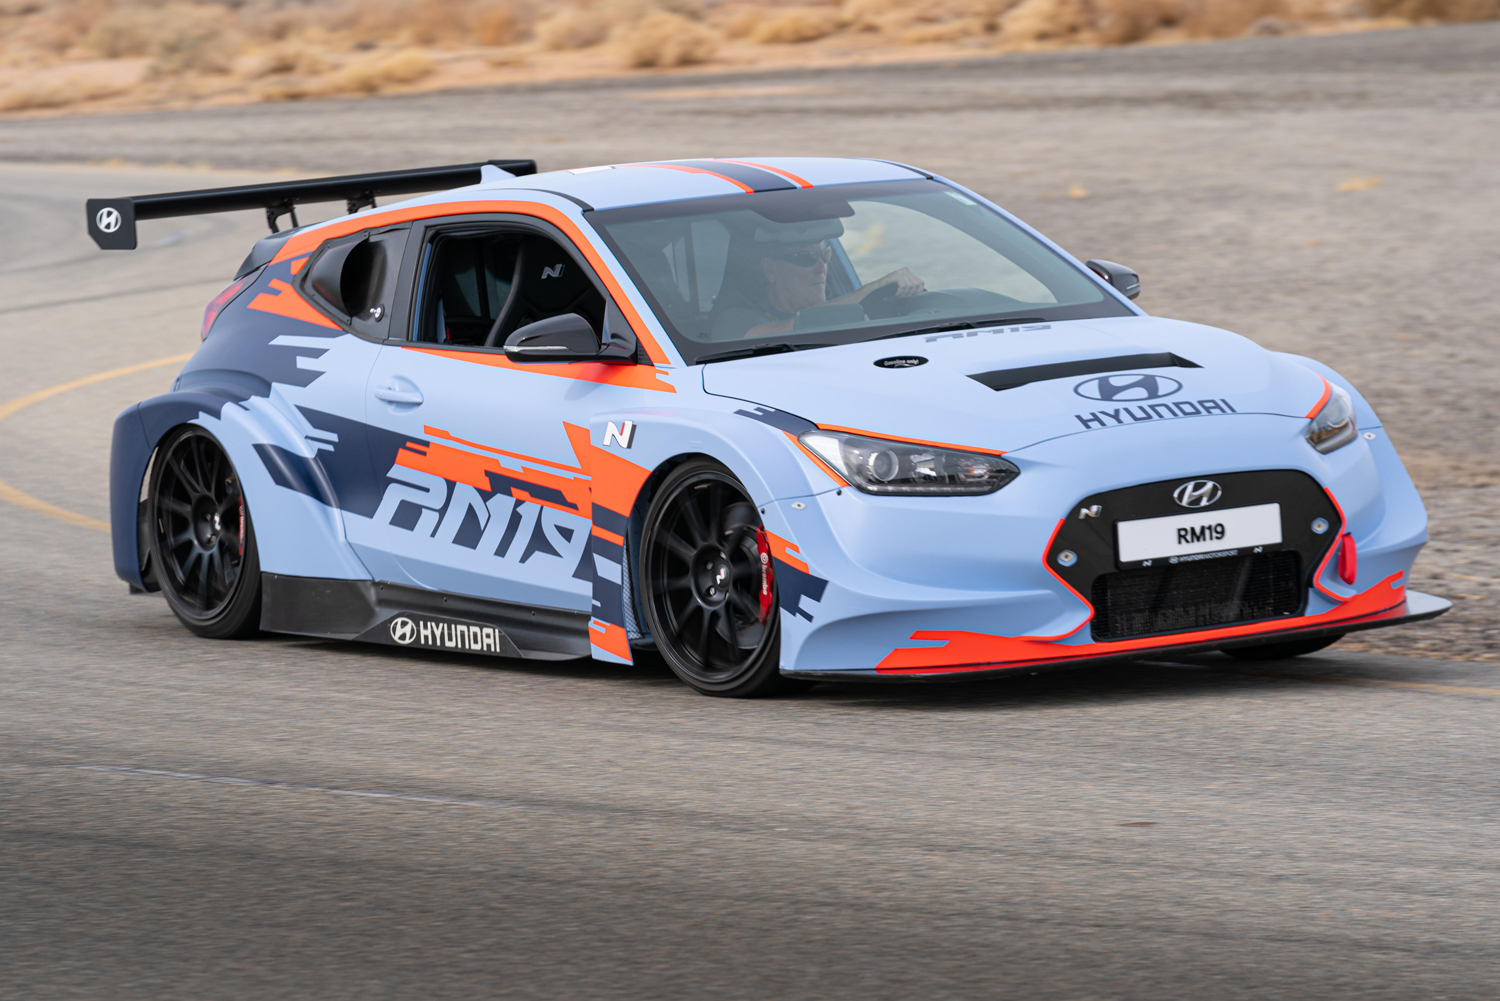 mid engined hyundai rm19 hot hatch unveiled at los angeles auto show 1